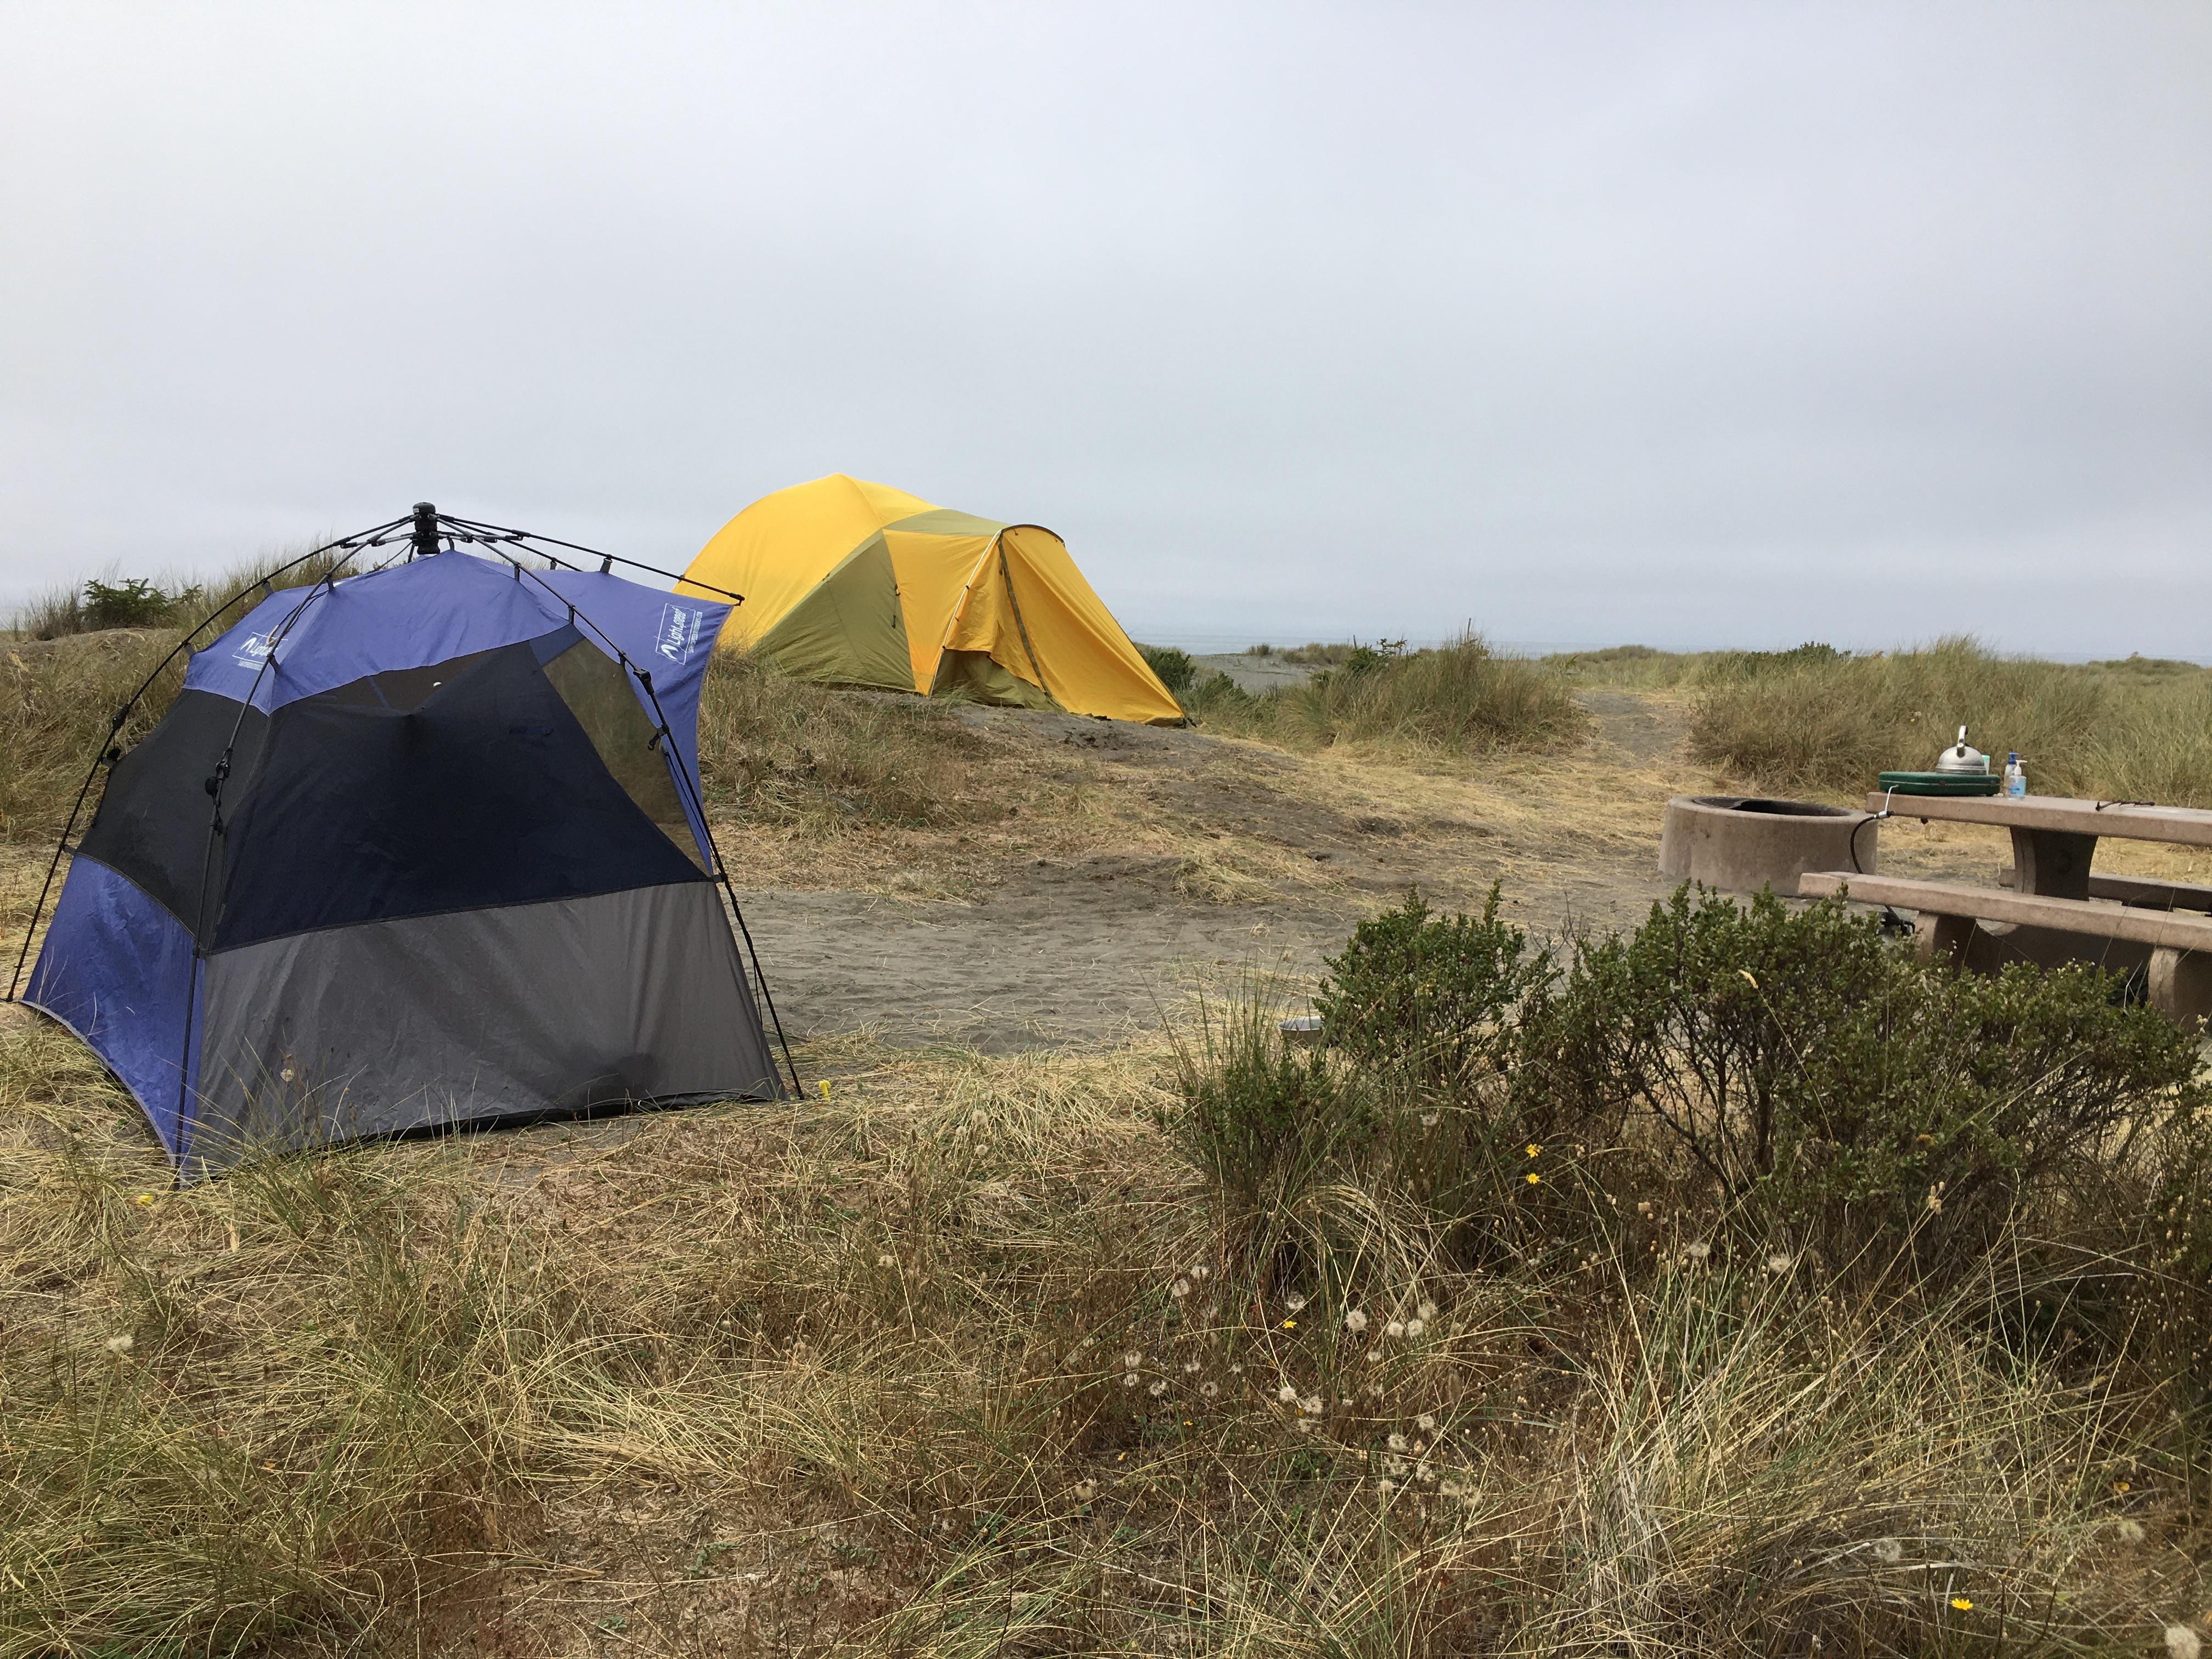 Two tents sit in sand dunes and at a grassy site